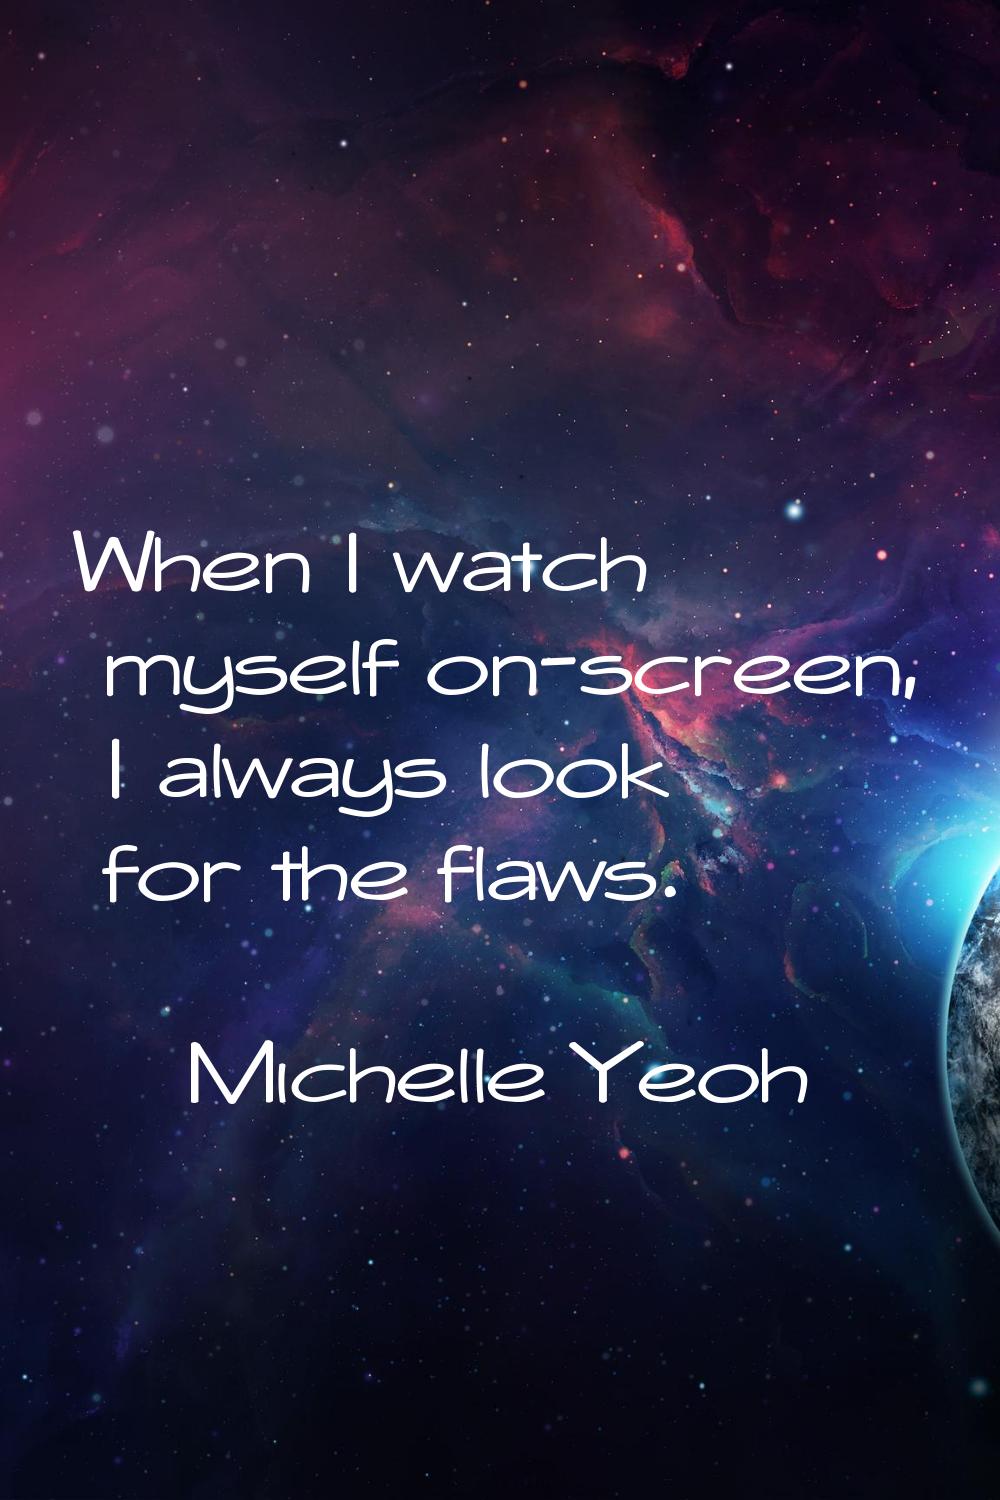 When I watch myself on-screen, I always look for the flaws.